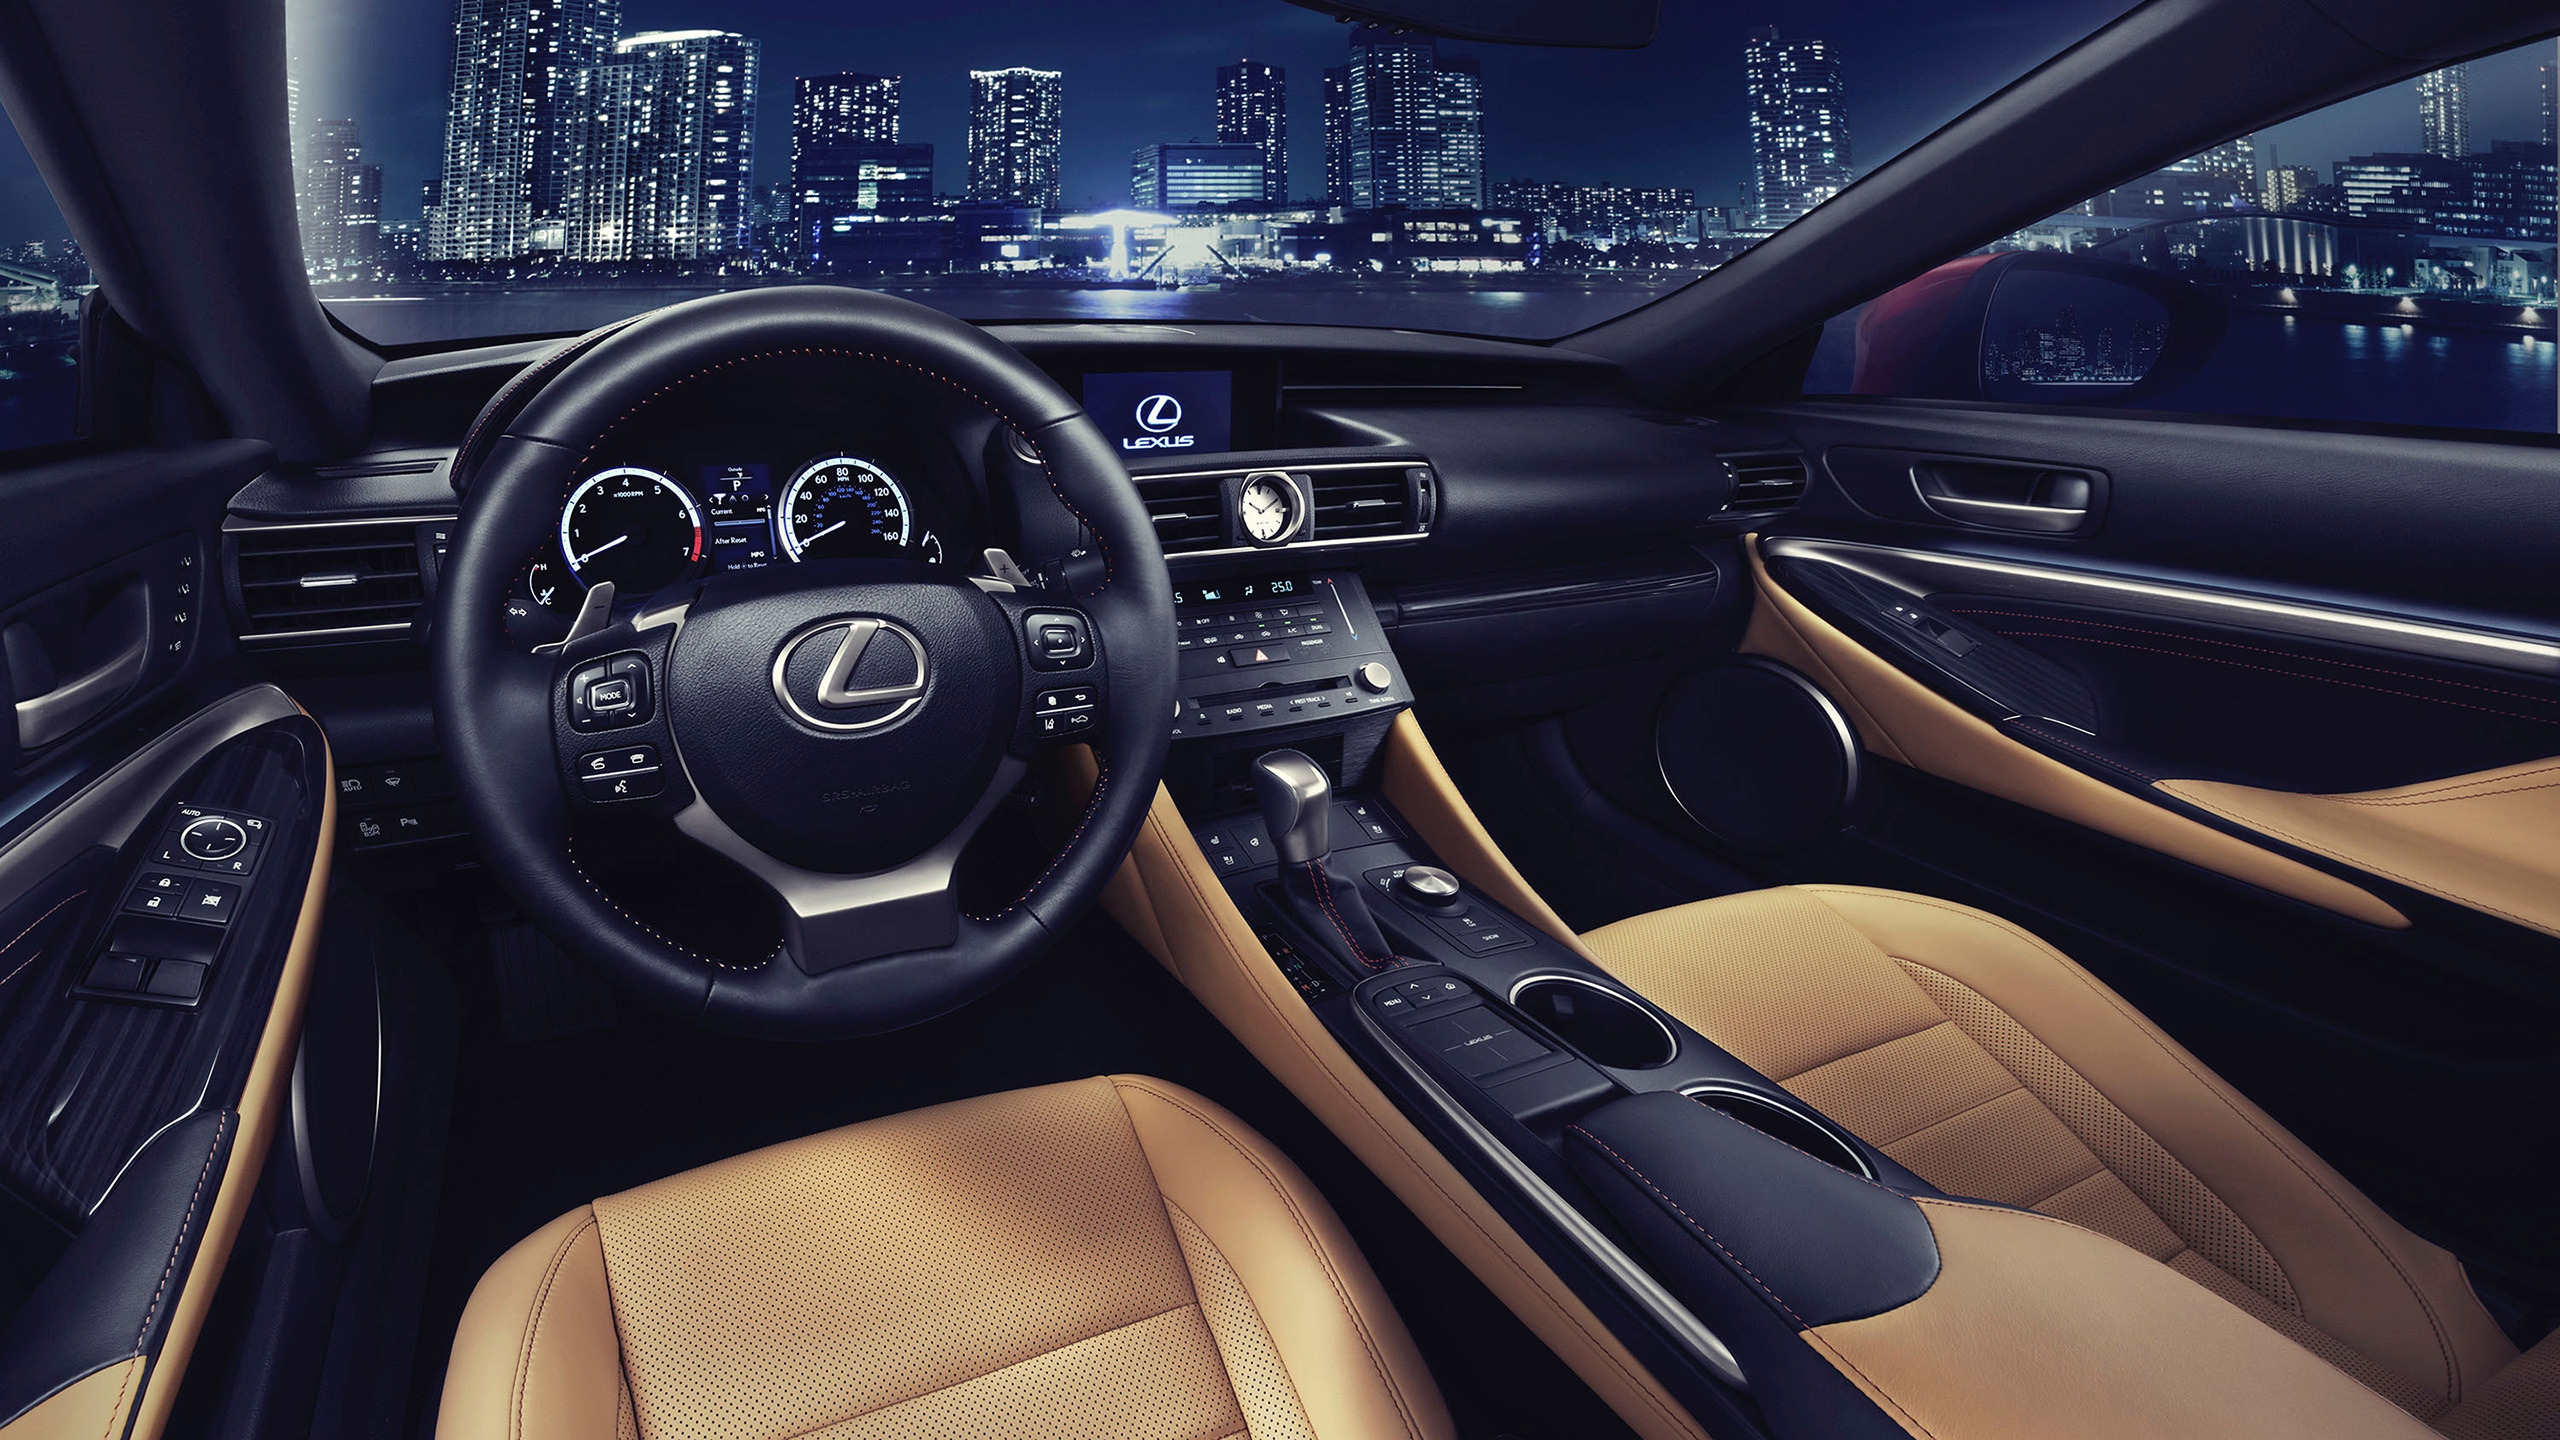 Lexus RC Coupe Interior for 2560x1440 HDTV resolution